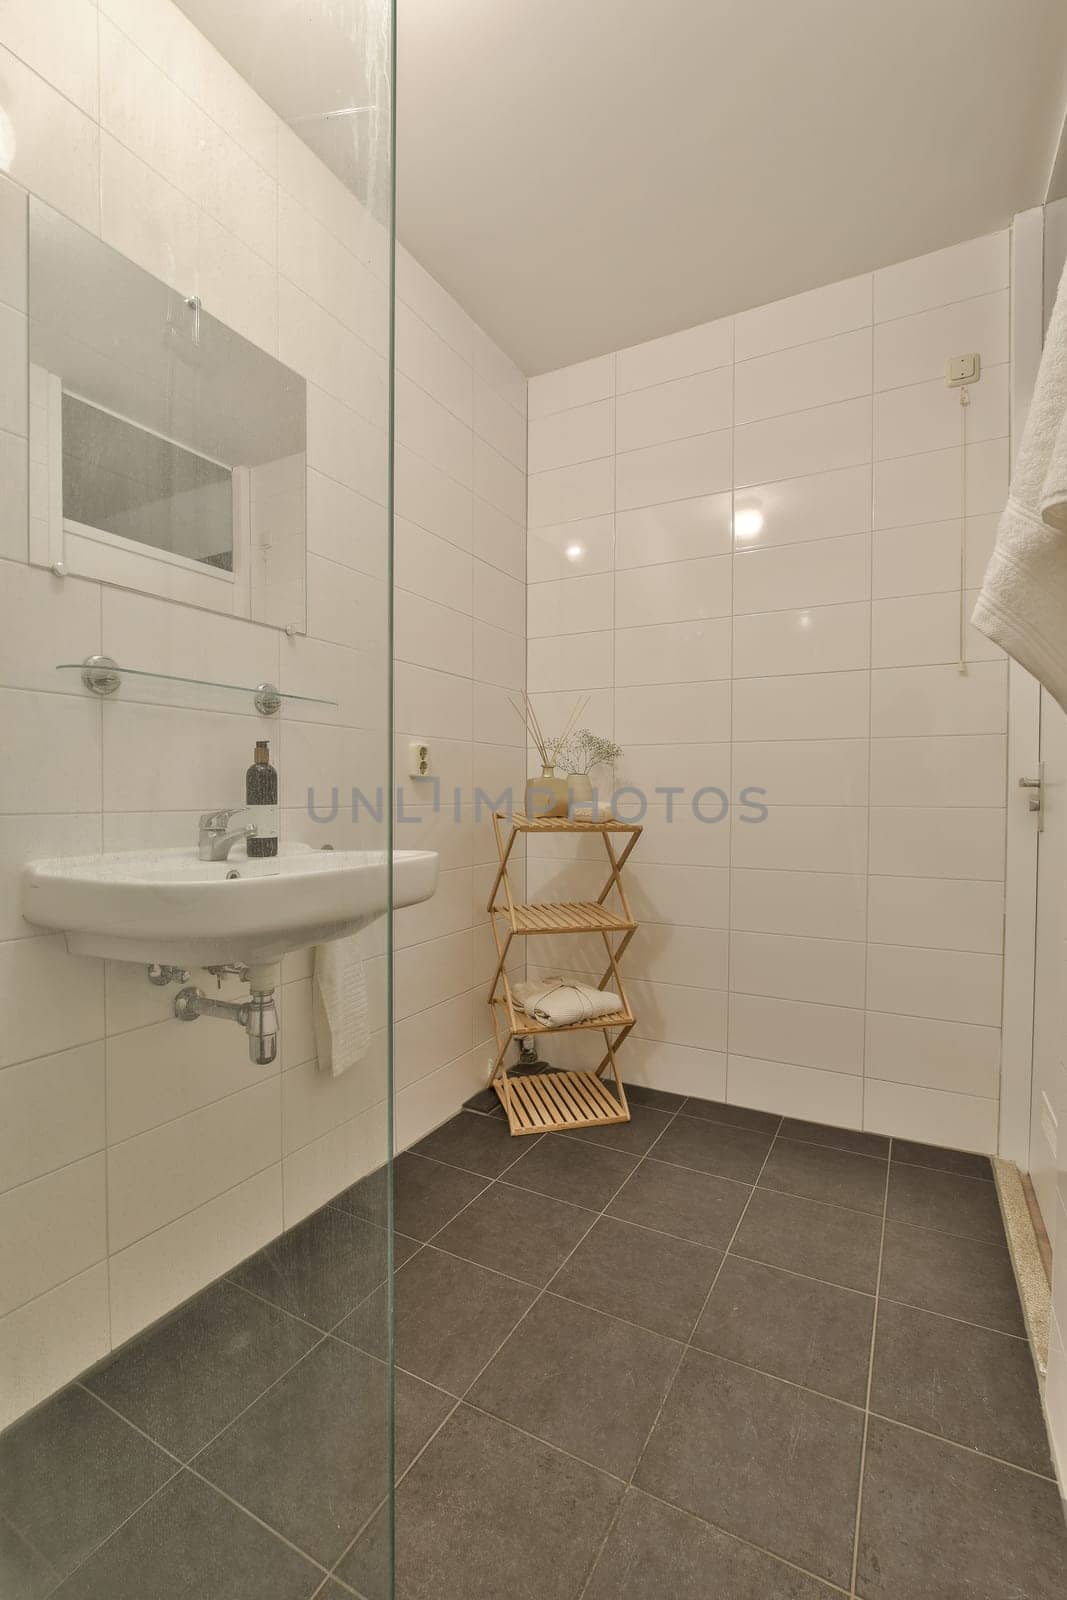 a bathroom that is very clean and ready to be used for the washrooms or toiletries, as well